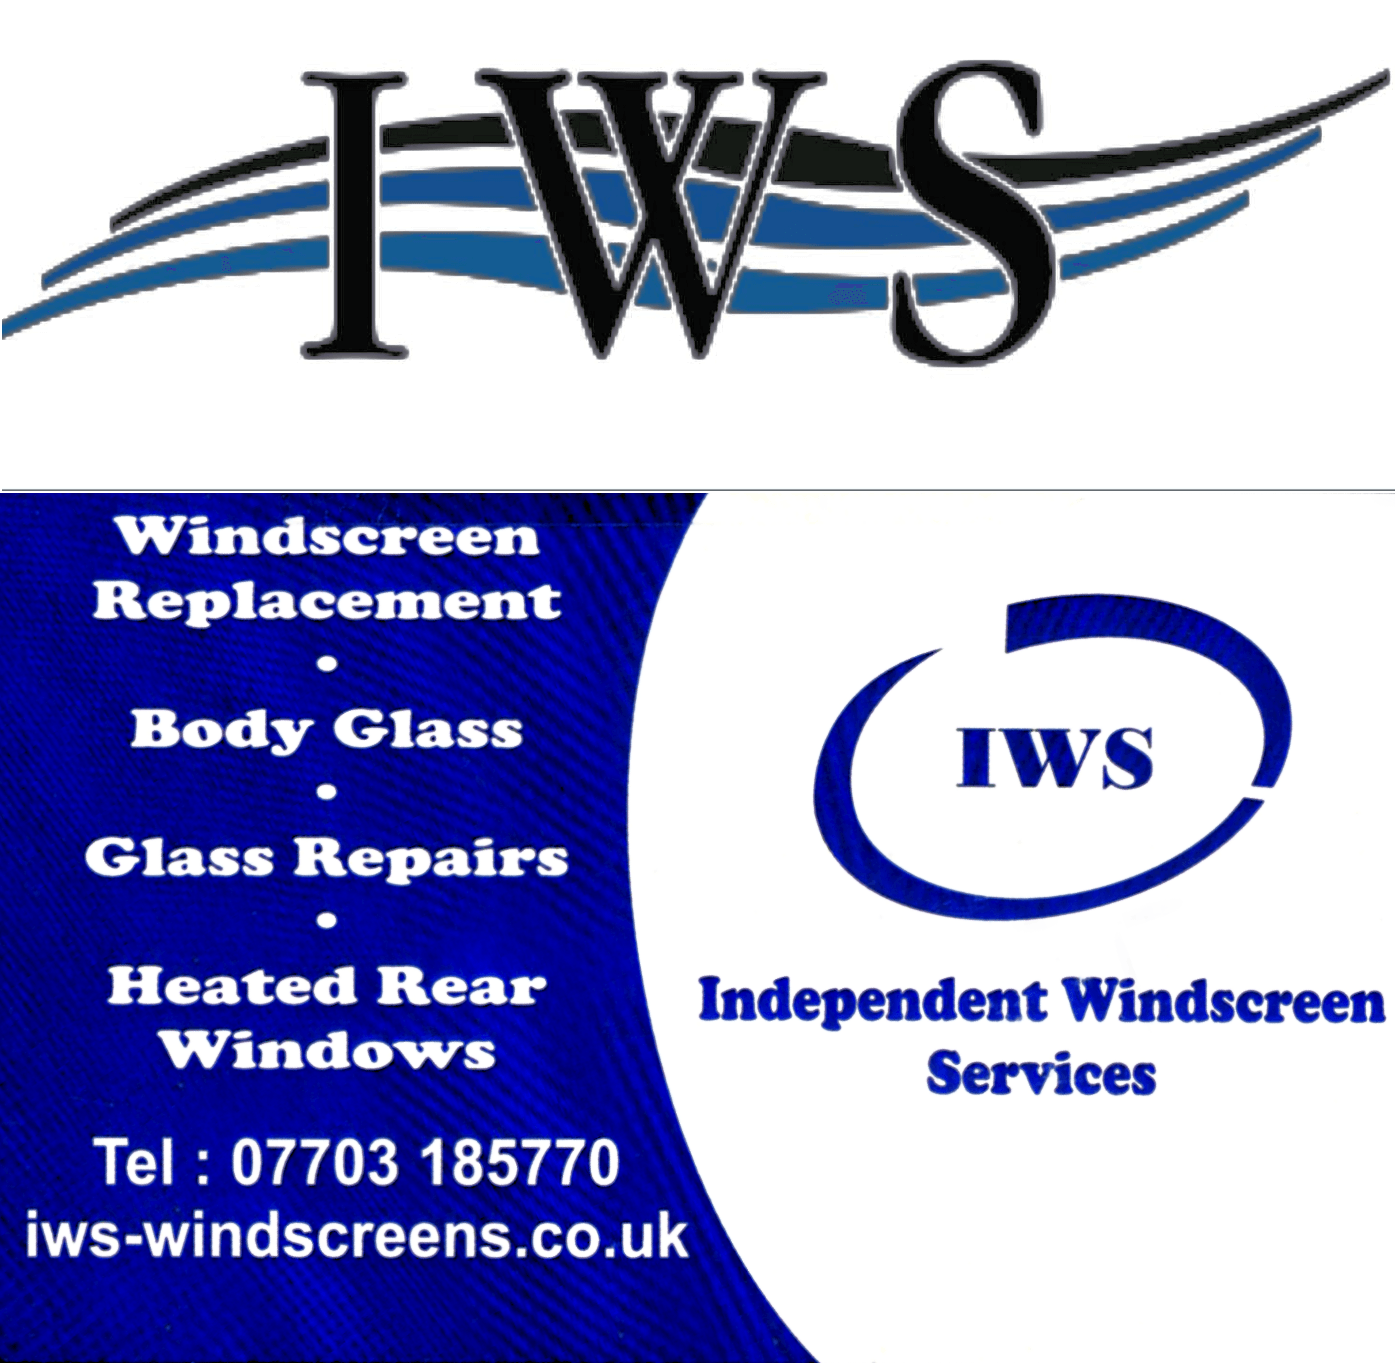 Independent Windscreen Services